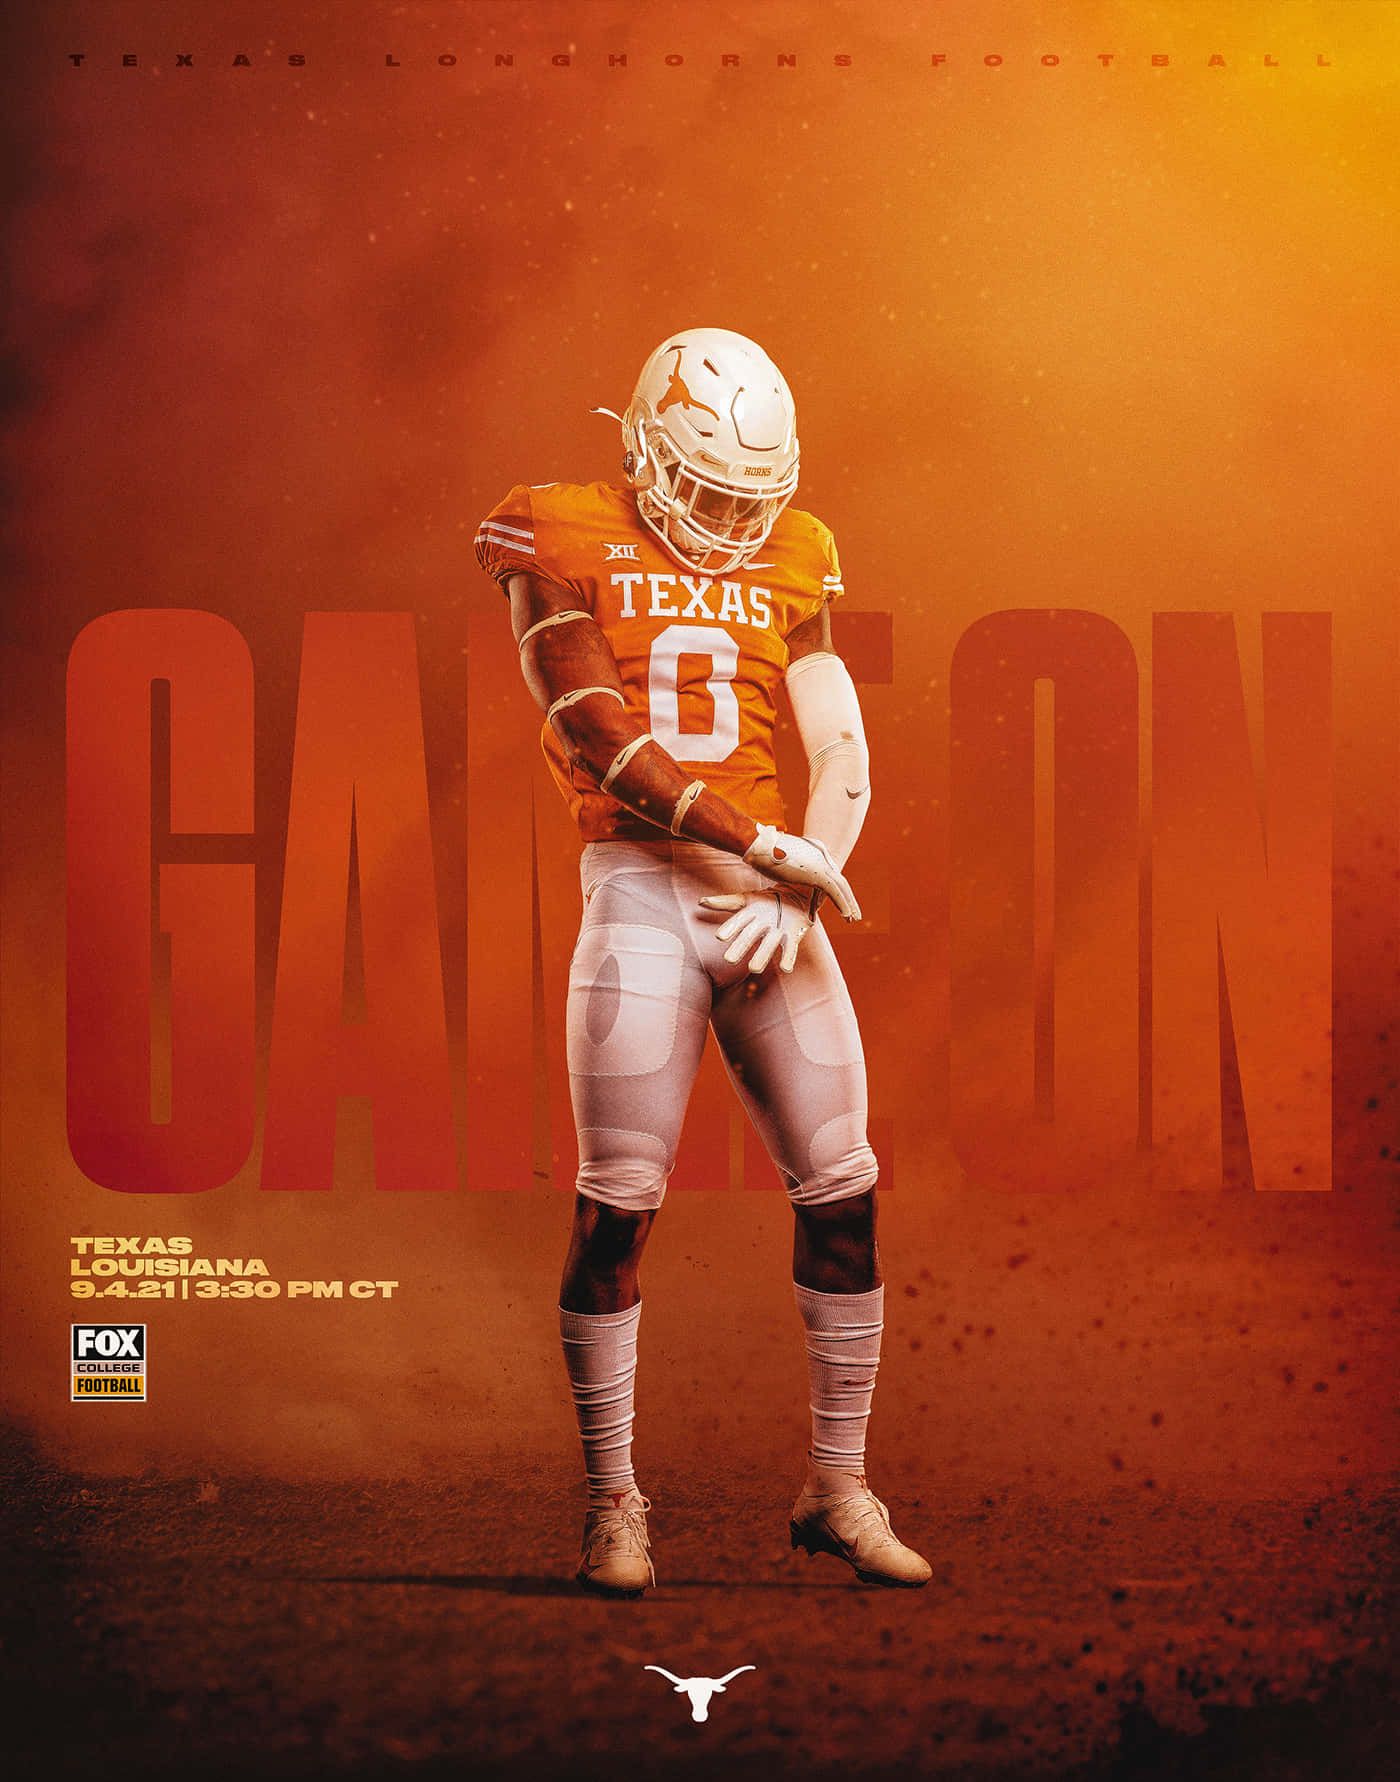 The Longhorns' game day poster for the 2020 season opener against TCU. - Longhorn